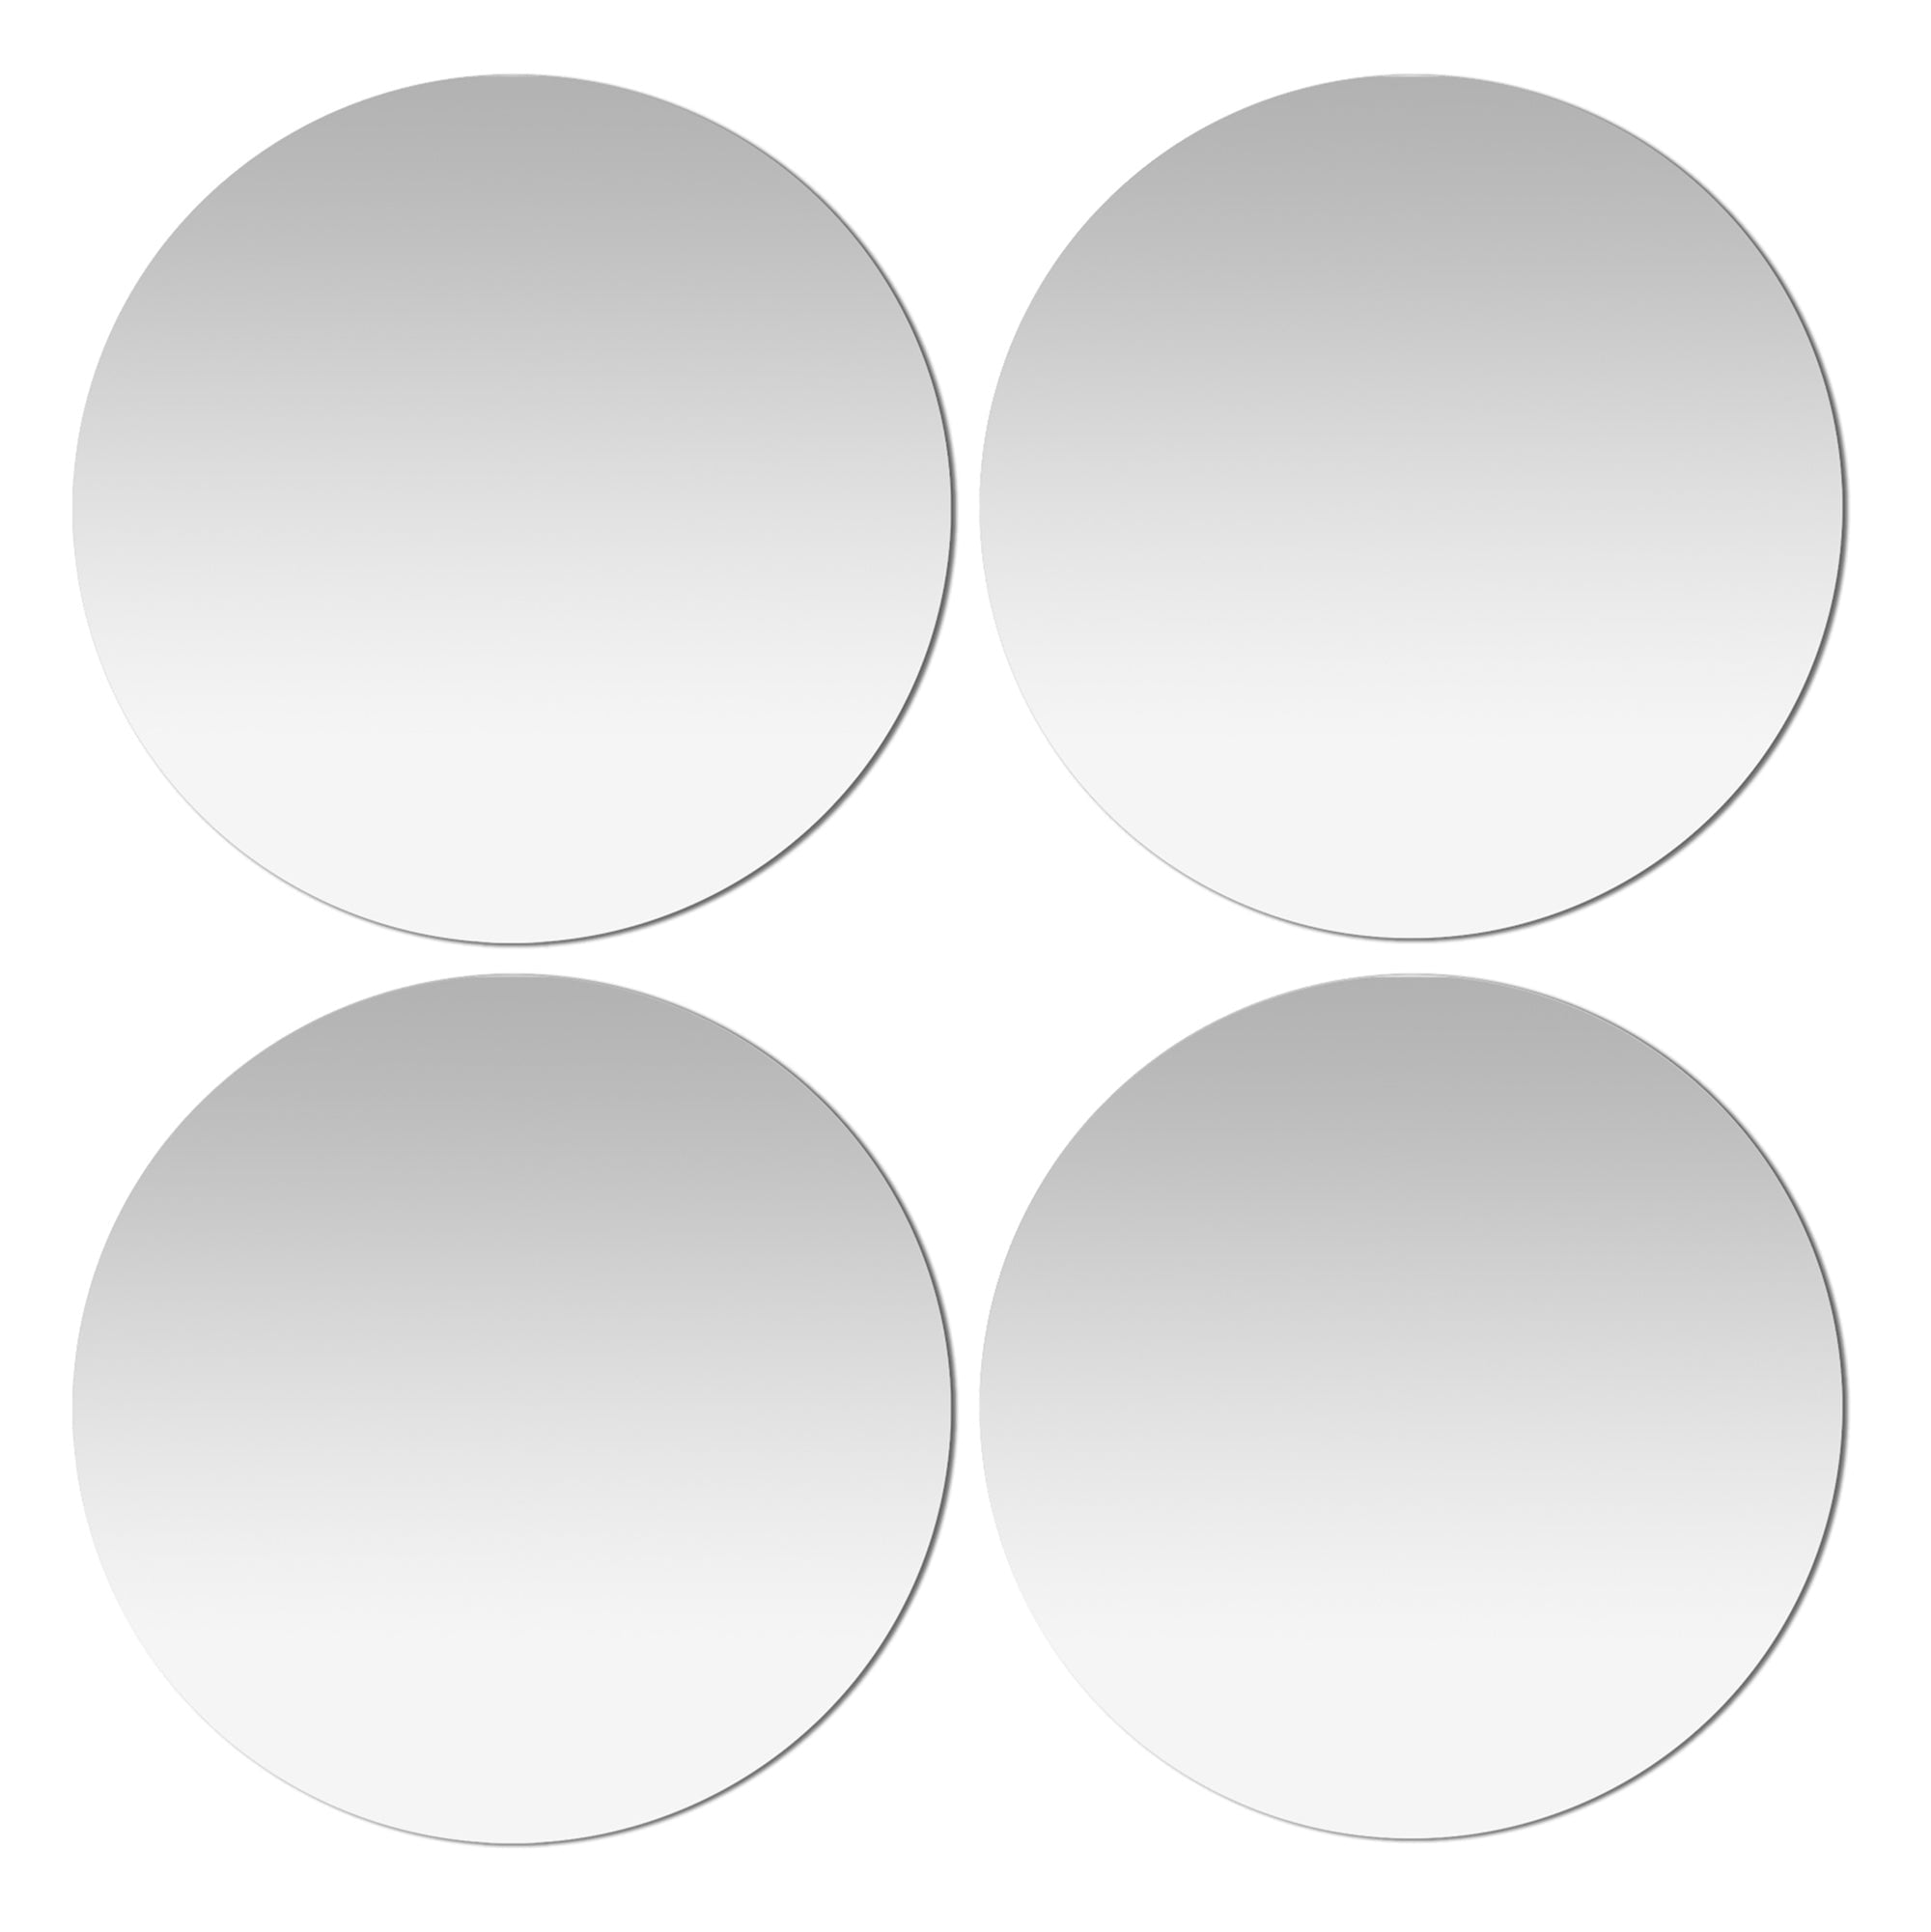 Americanflat Adhesive Mirror Tiles - Moon Phase Design - Peel and Stick  Mirrors for Wall - (5pcs Set)